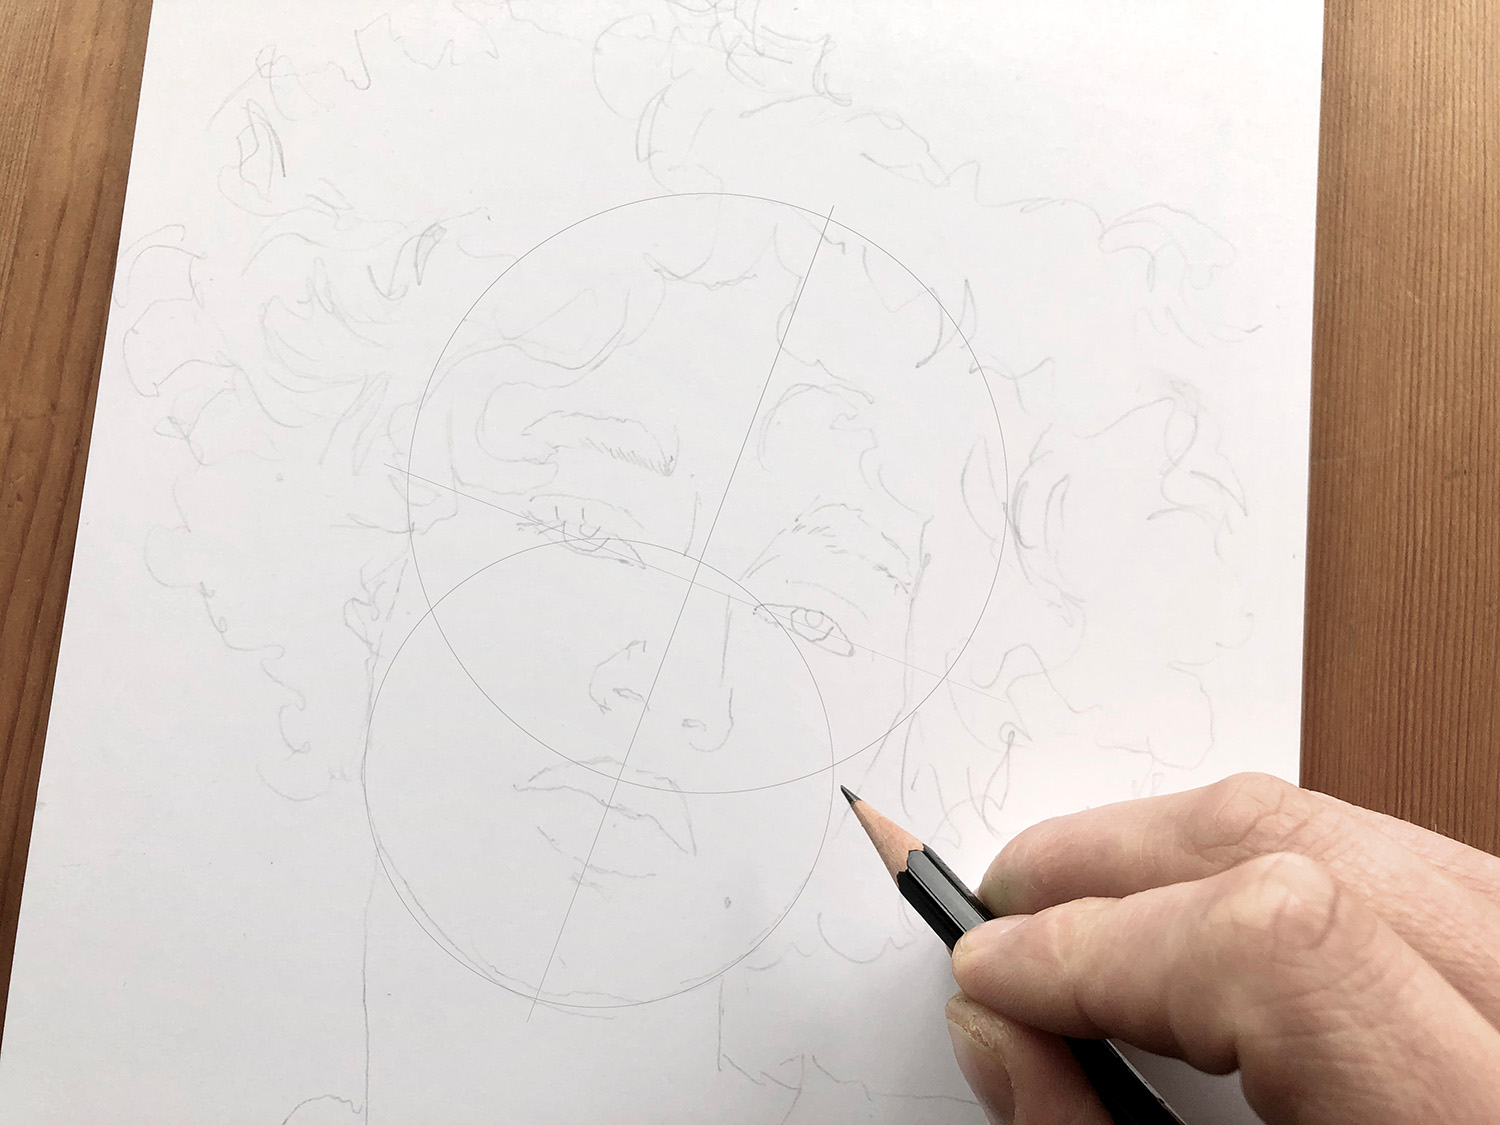 Pencil Drawing - How To Draw A Pencil Step By Step